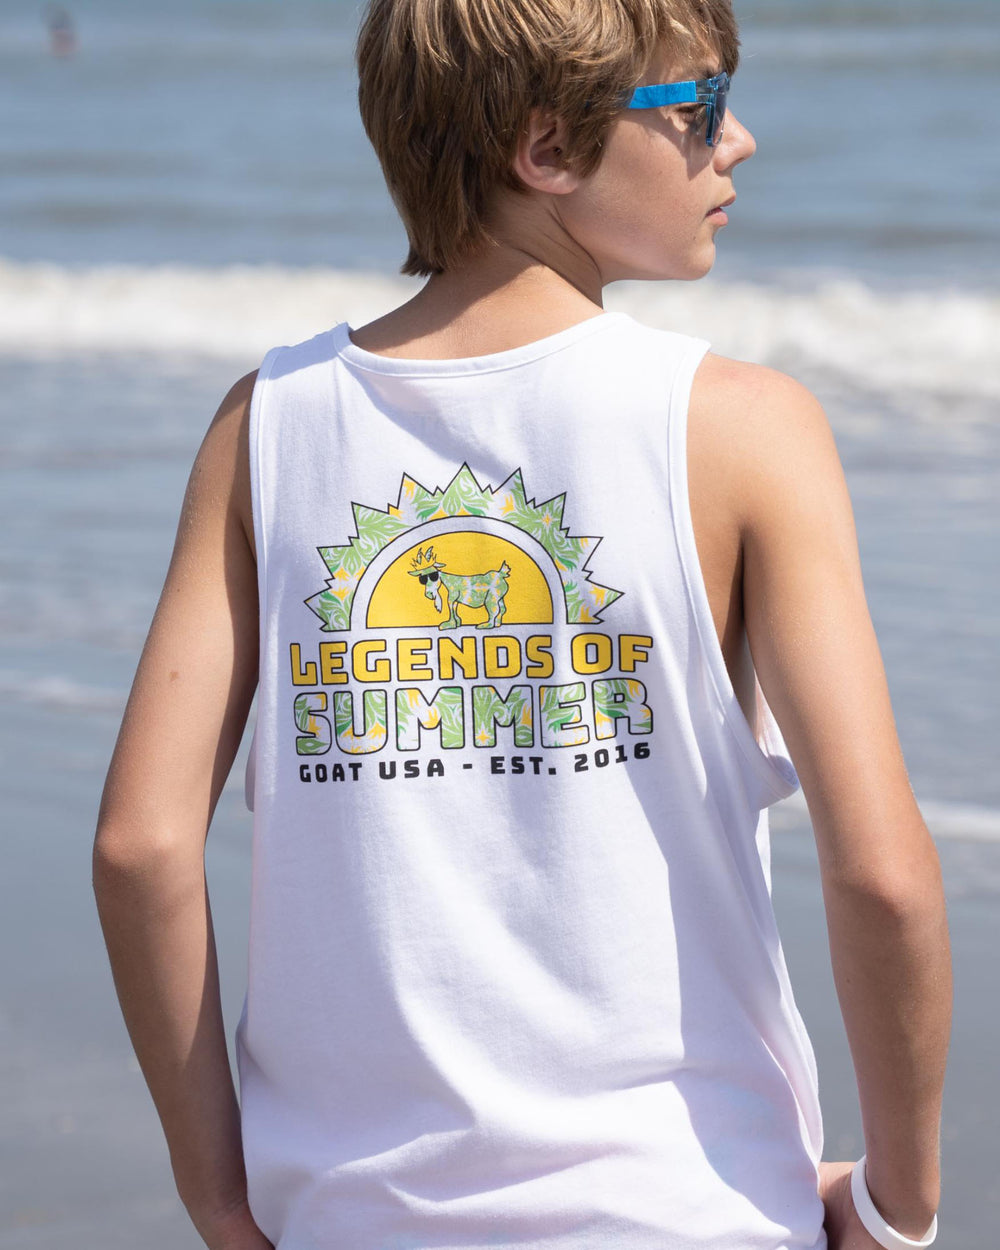 Kid wearing a white tank top on the beach looking to his side